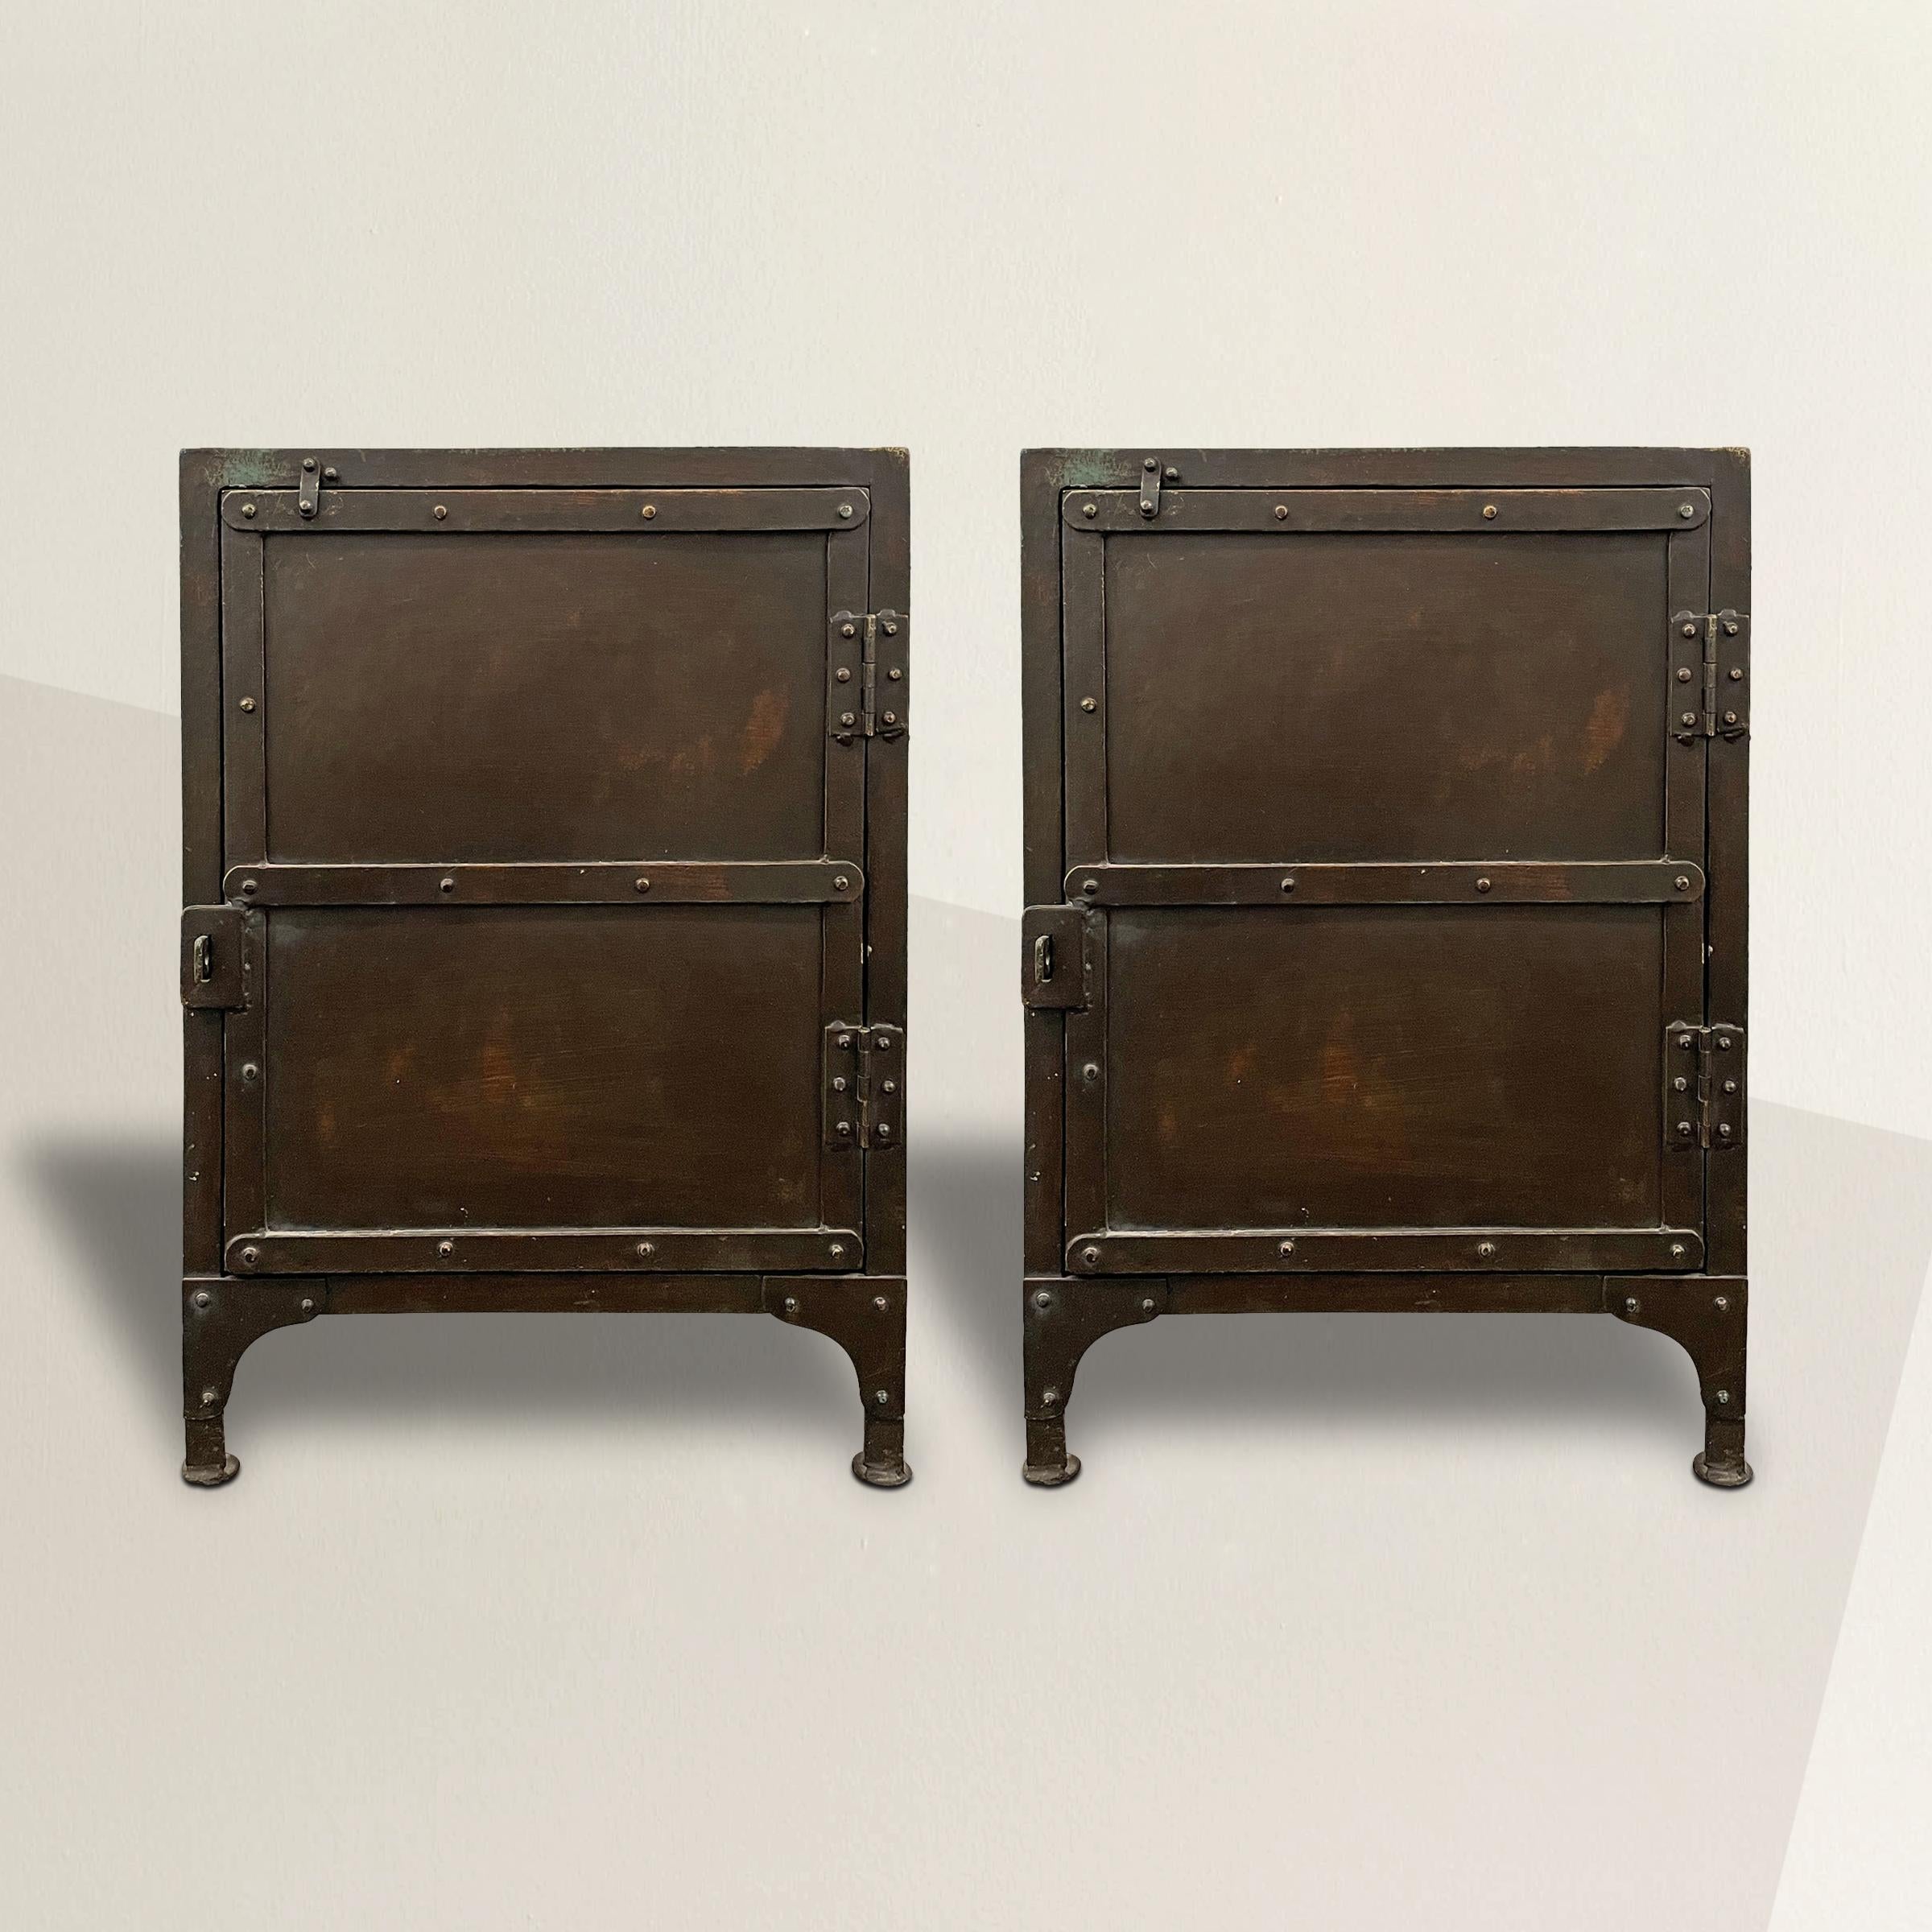 A wonderful pair of American 20th century Industrial steel cabinets, each with a door and a shelf inside. The perfect pair of nightstands or end tables!